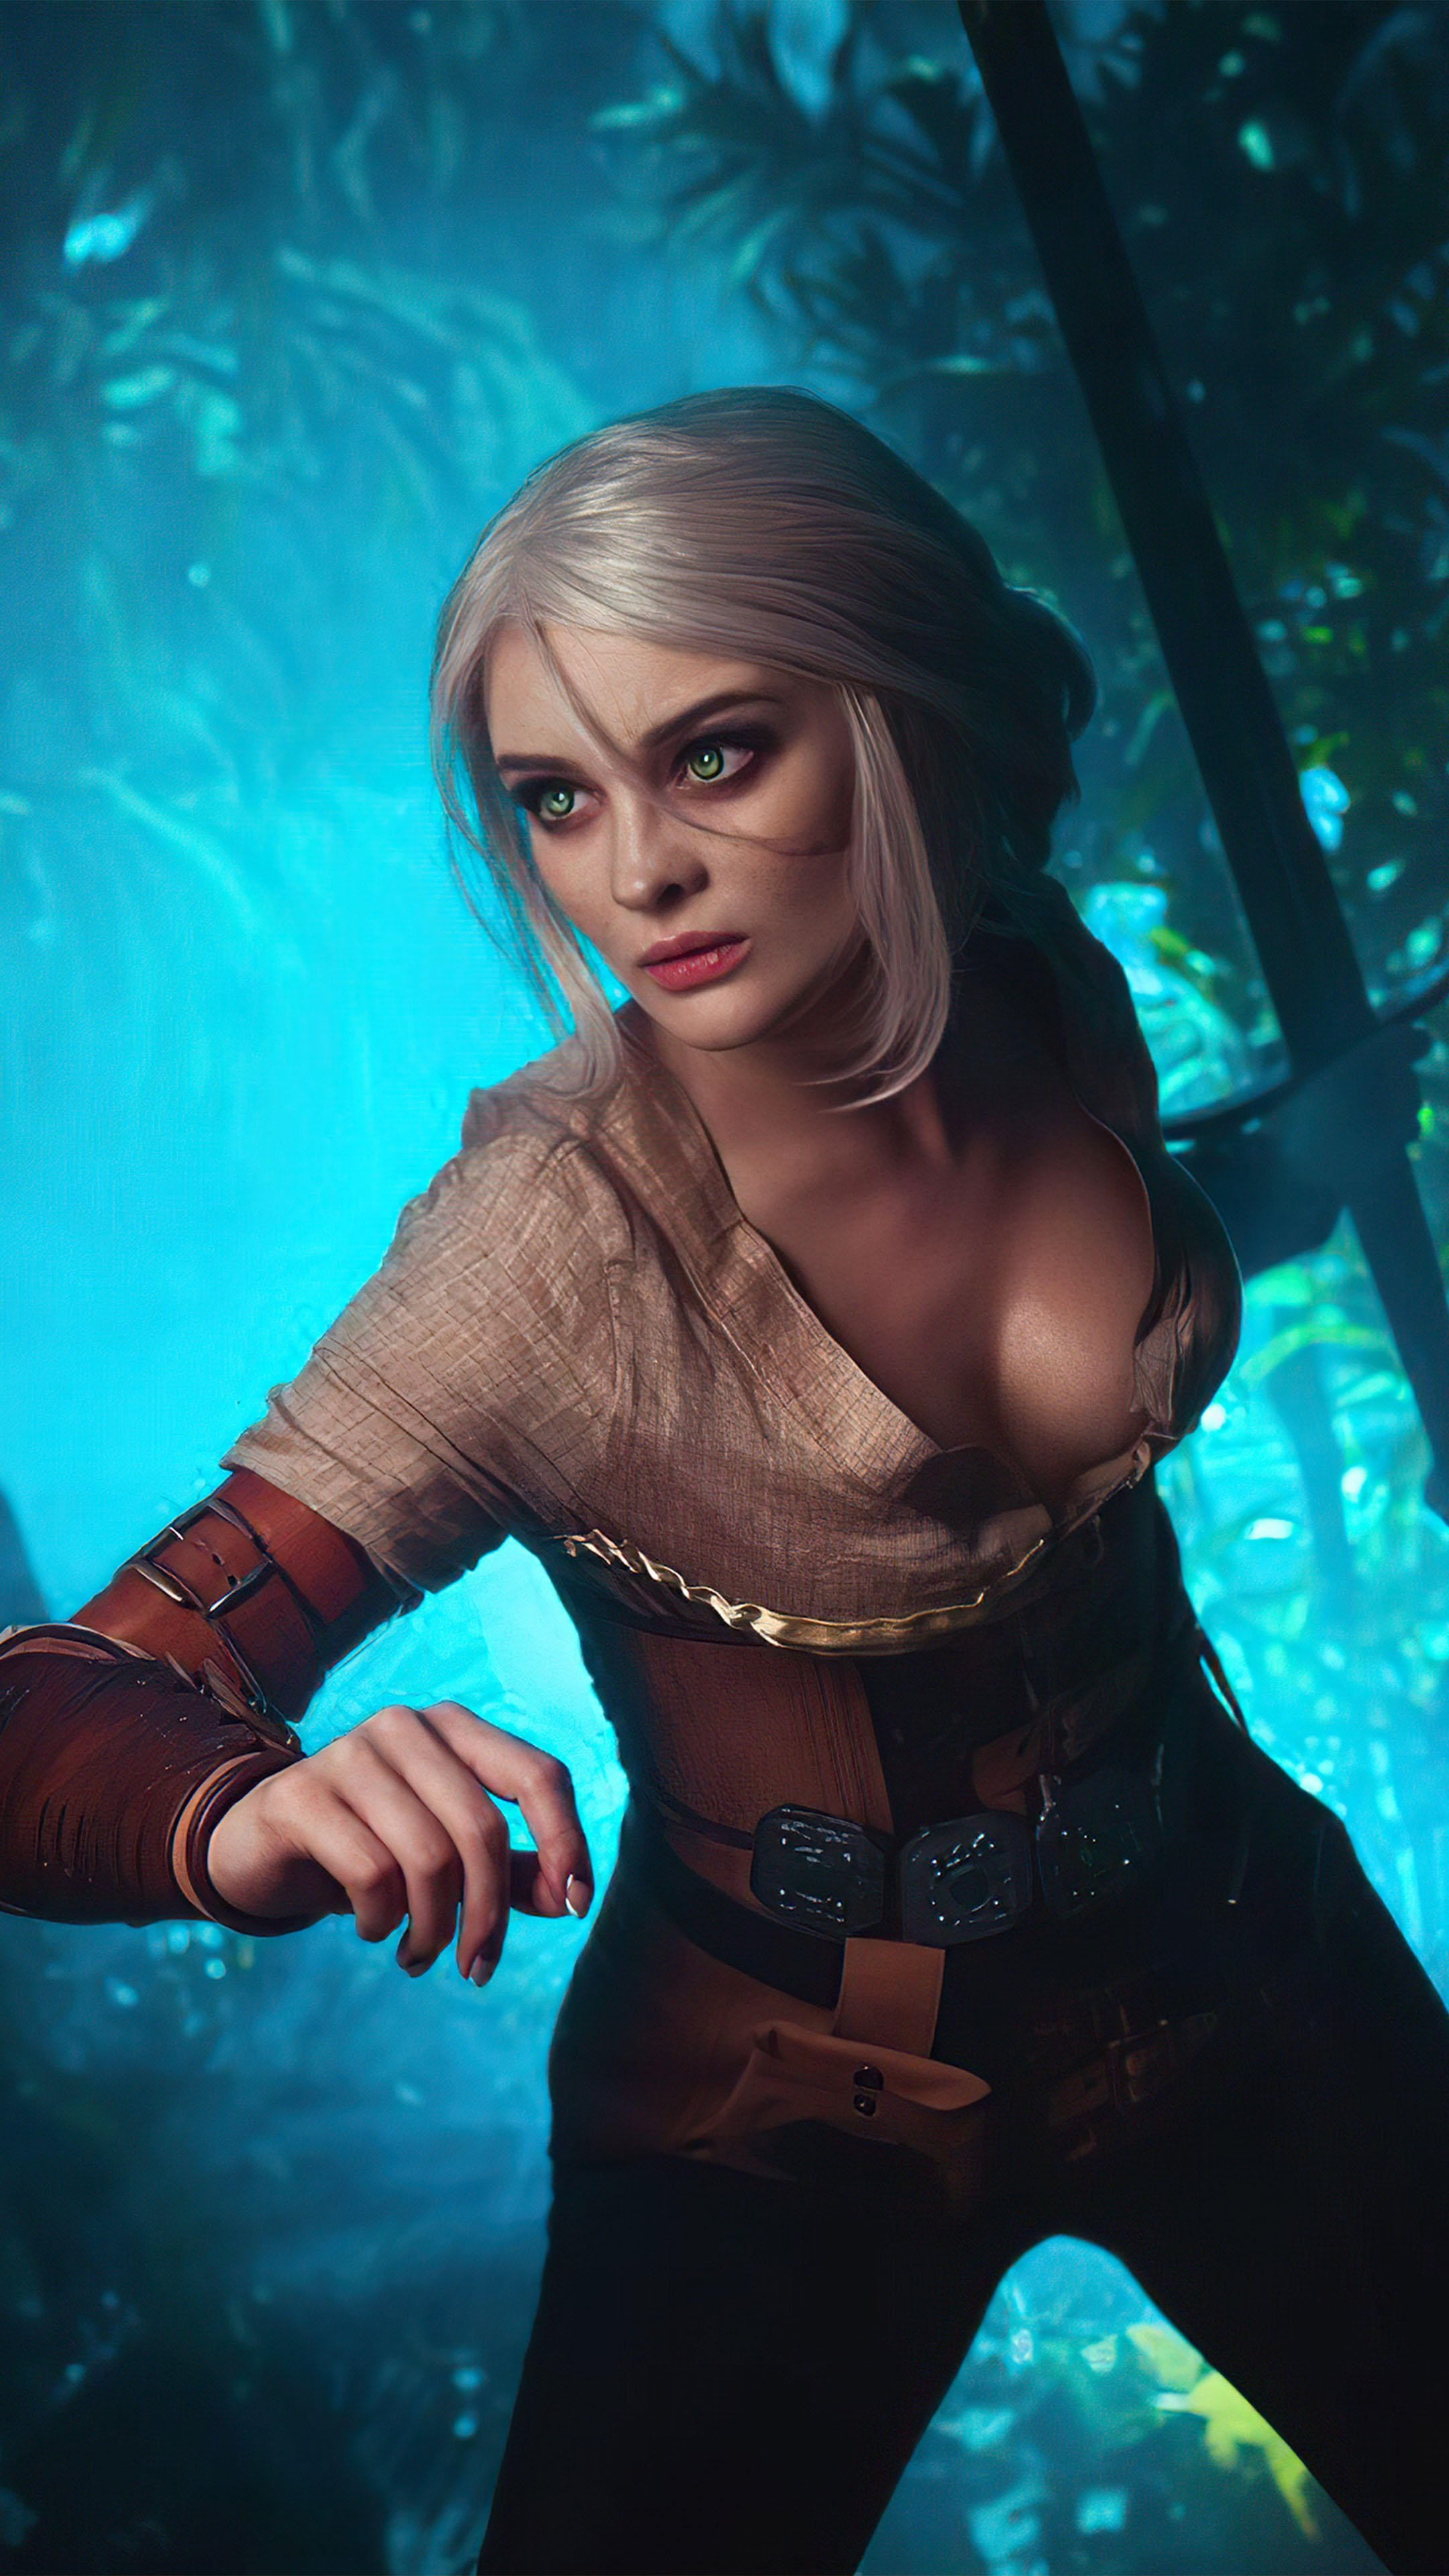 Ciri The Witcher 3 Game 4K Ultra HD Mobile Wallpaper